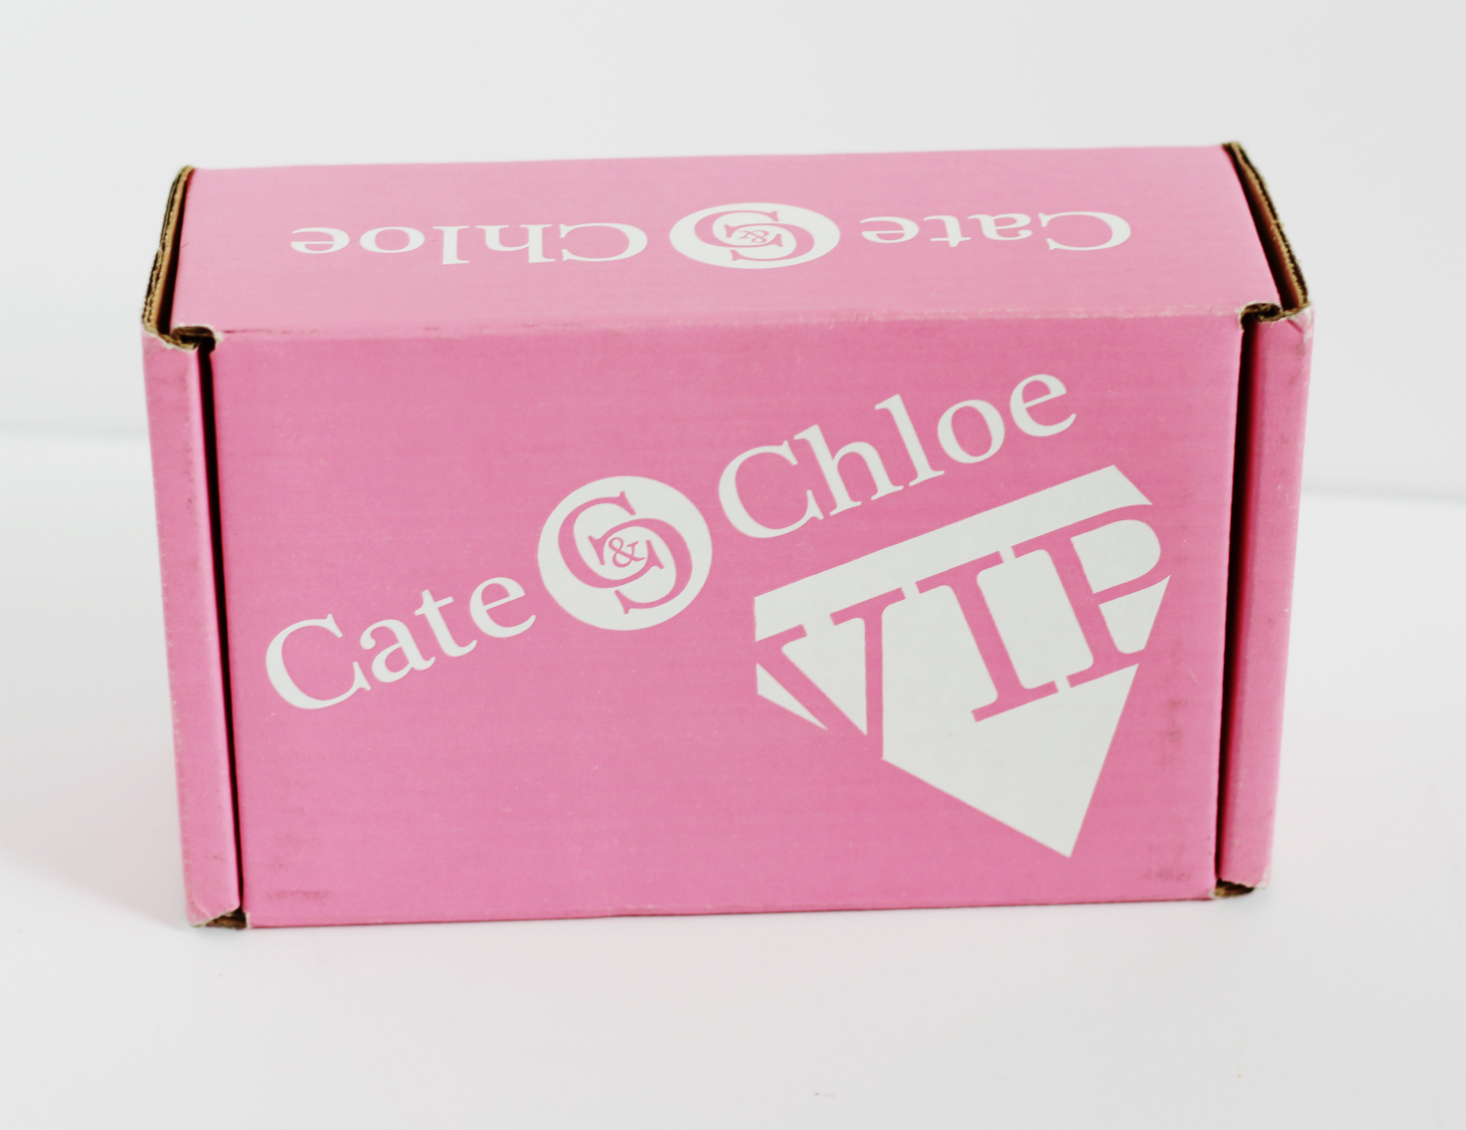 Cate & Chloe Subscription Box Review + Coupon – October 2017